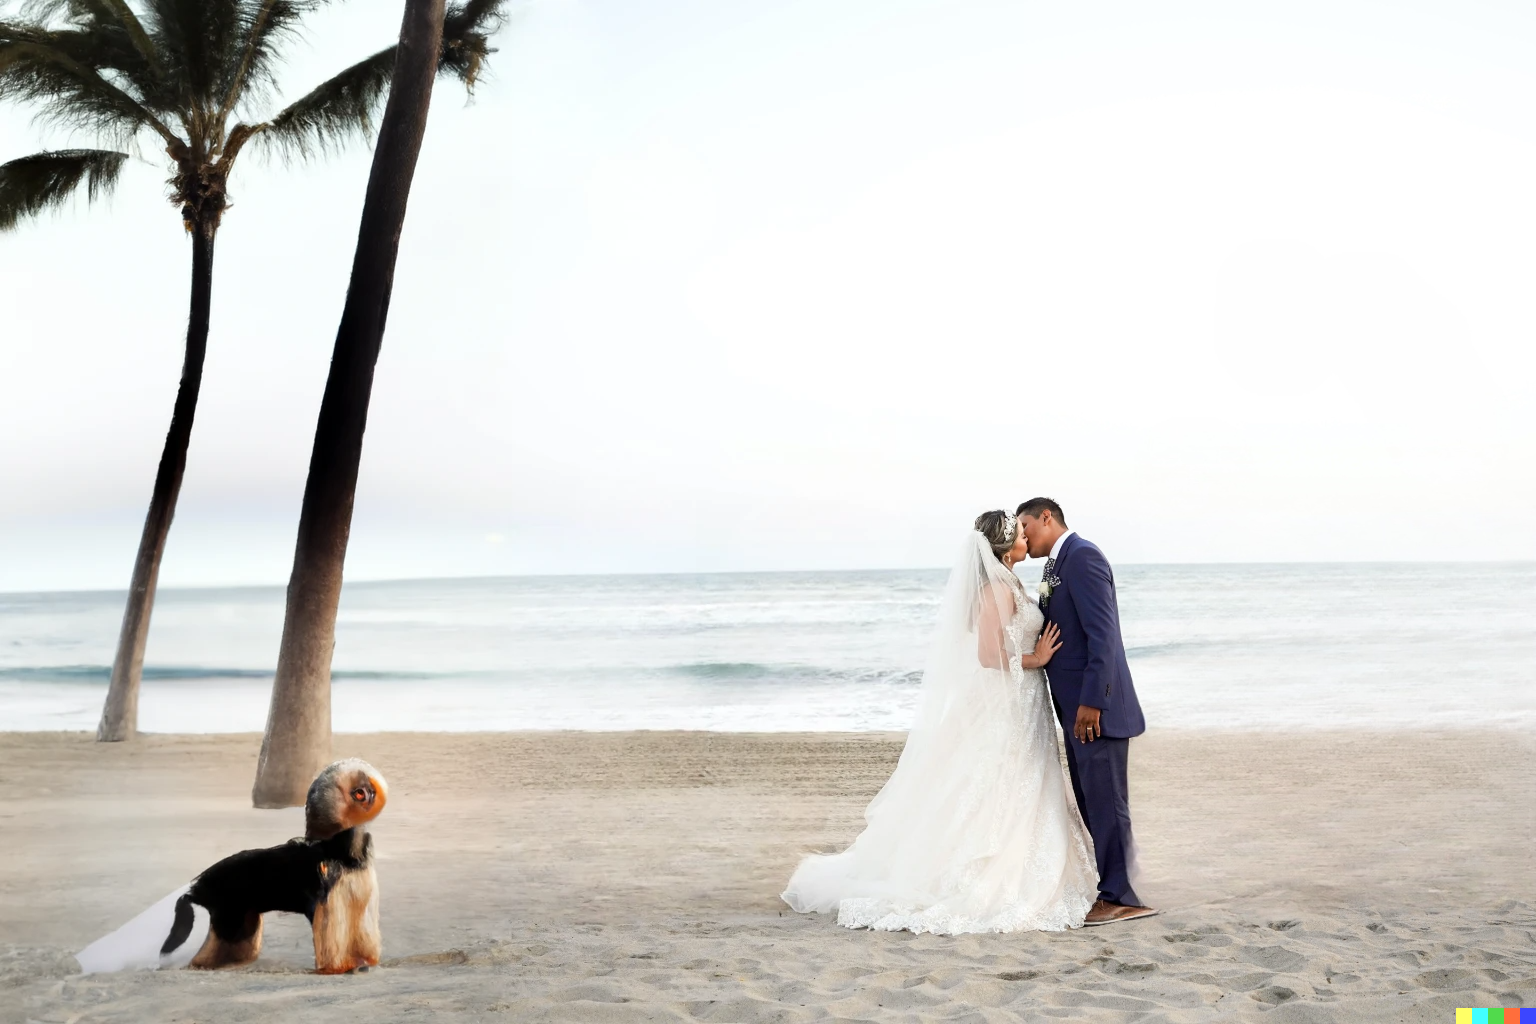 Same picture of the couple kissing, but to the left two palm trees have been added and a very strange looking dog.